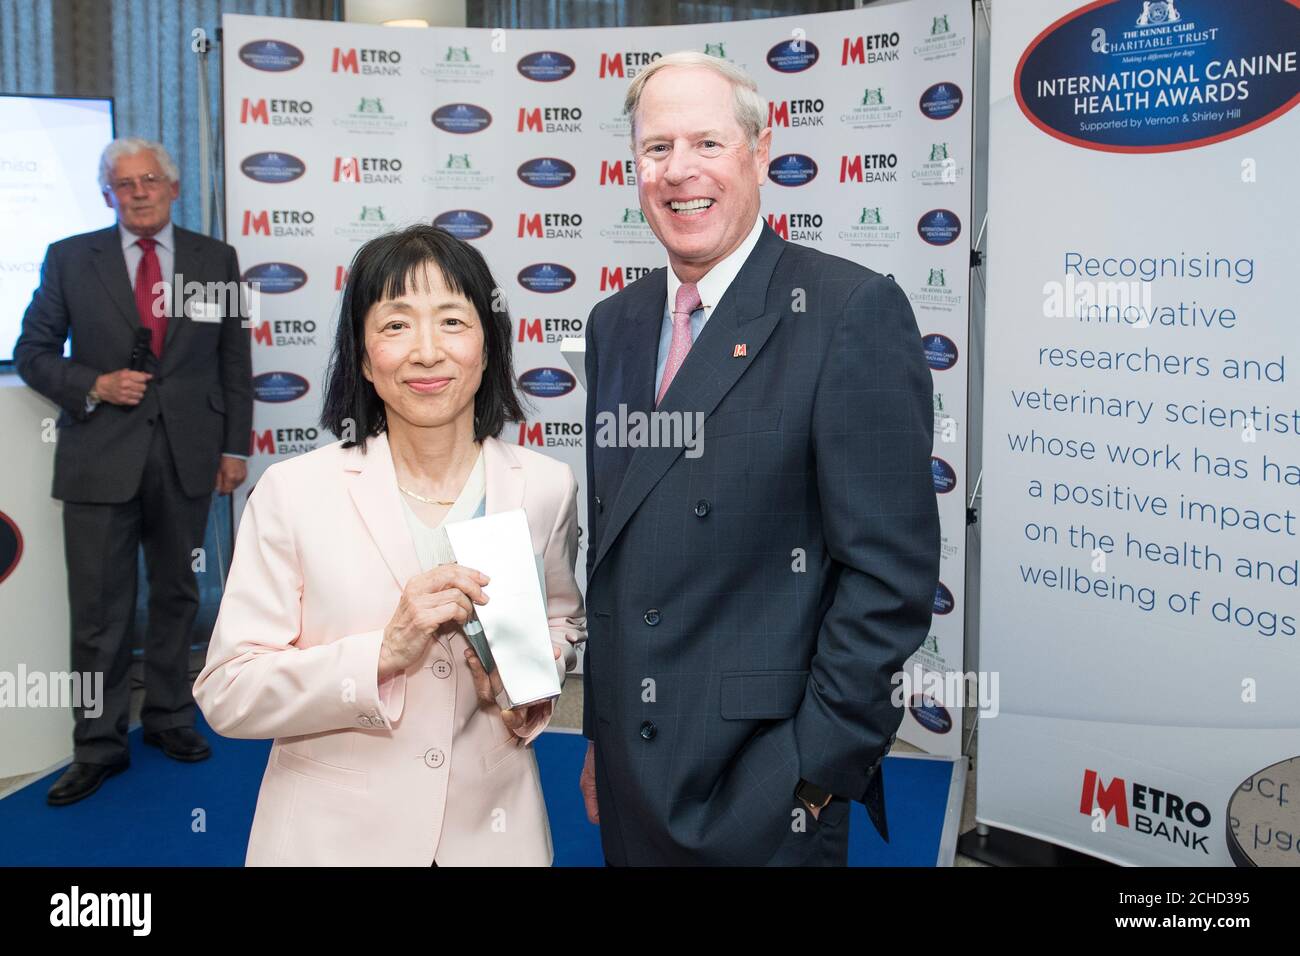 Dr Yasuko Rikihisa from the College of Veterinary Medicine Ohio State University, receives the International Award from Vernon Hill, founder of Metro Bank, during the International Canine Health Awards at the Kennel Club, London. Stock Photo